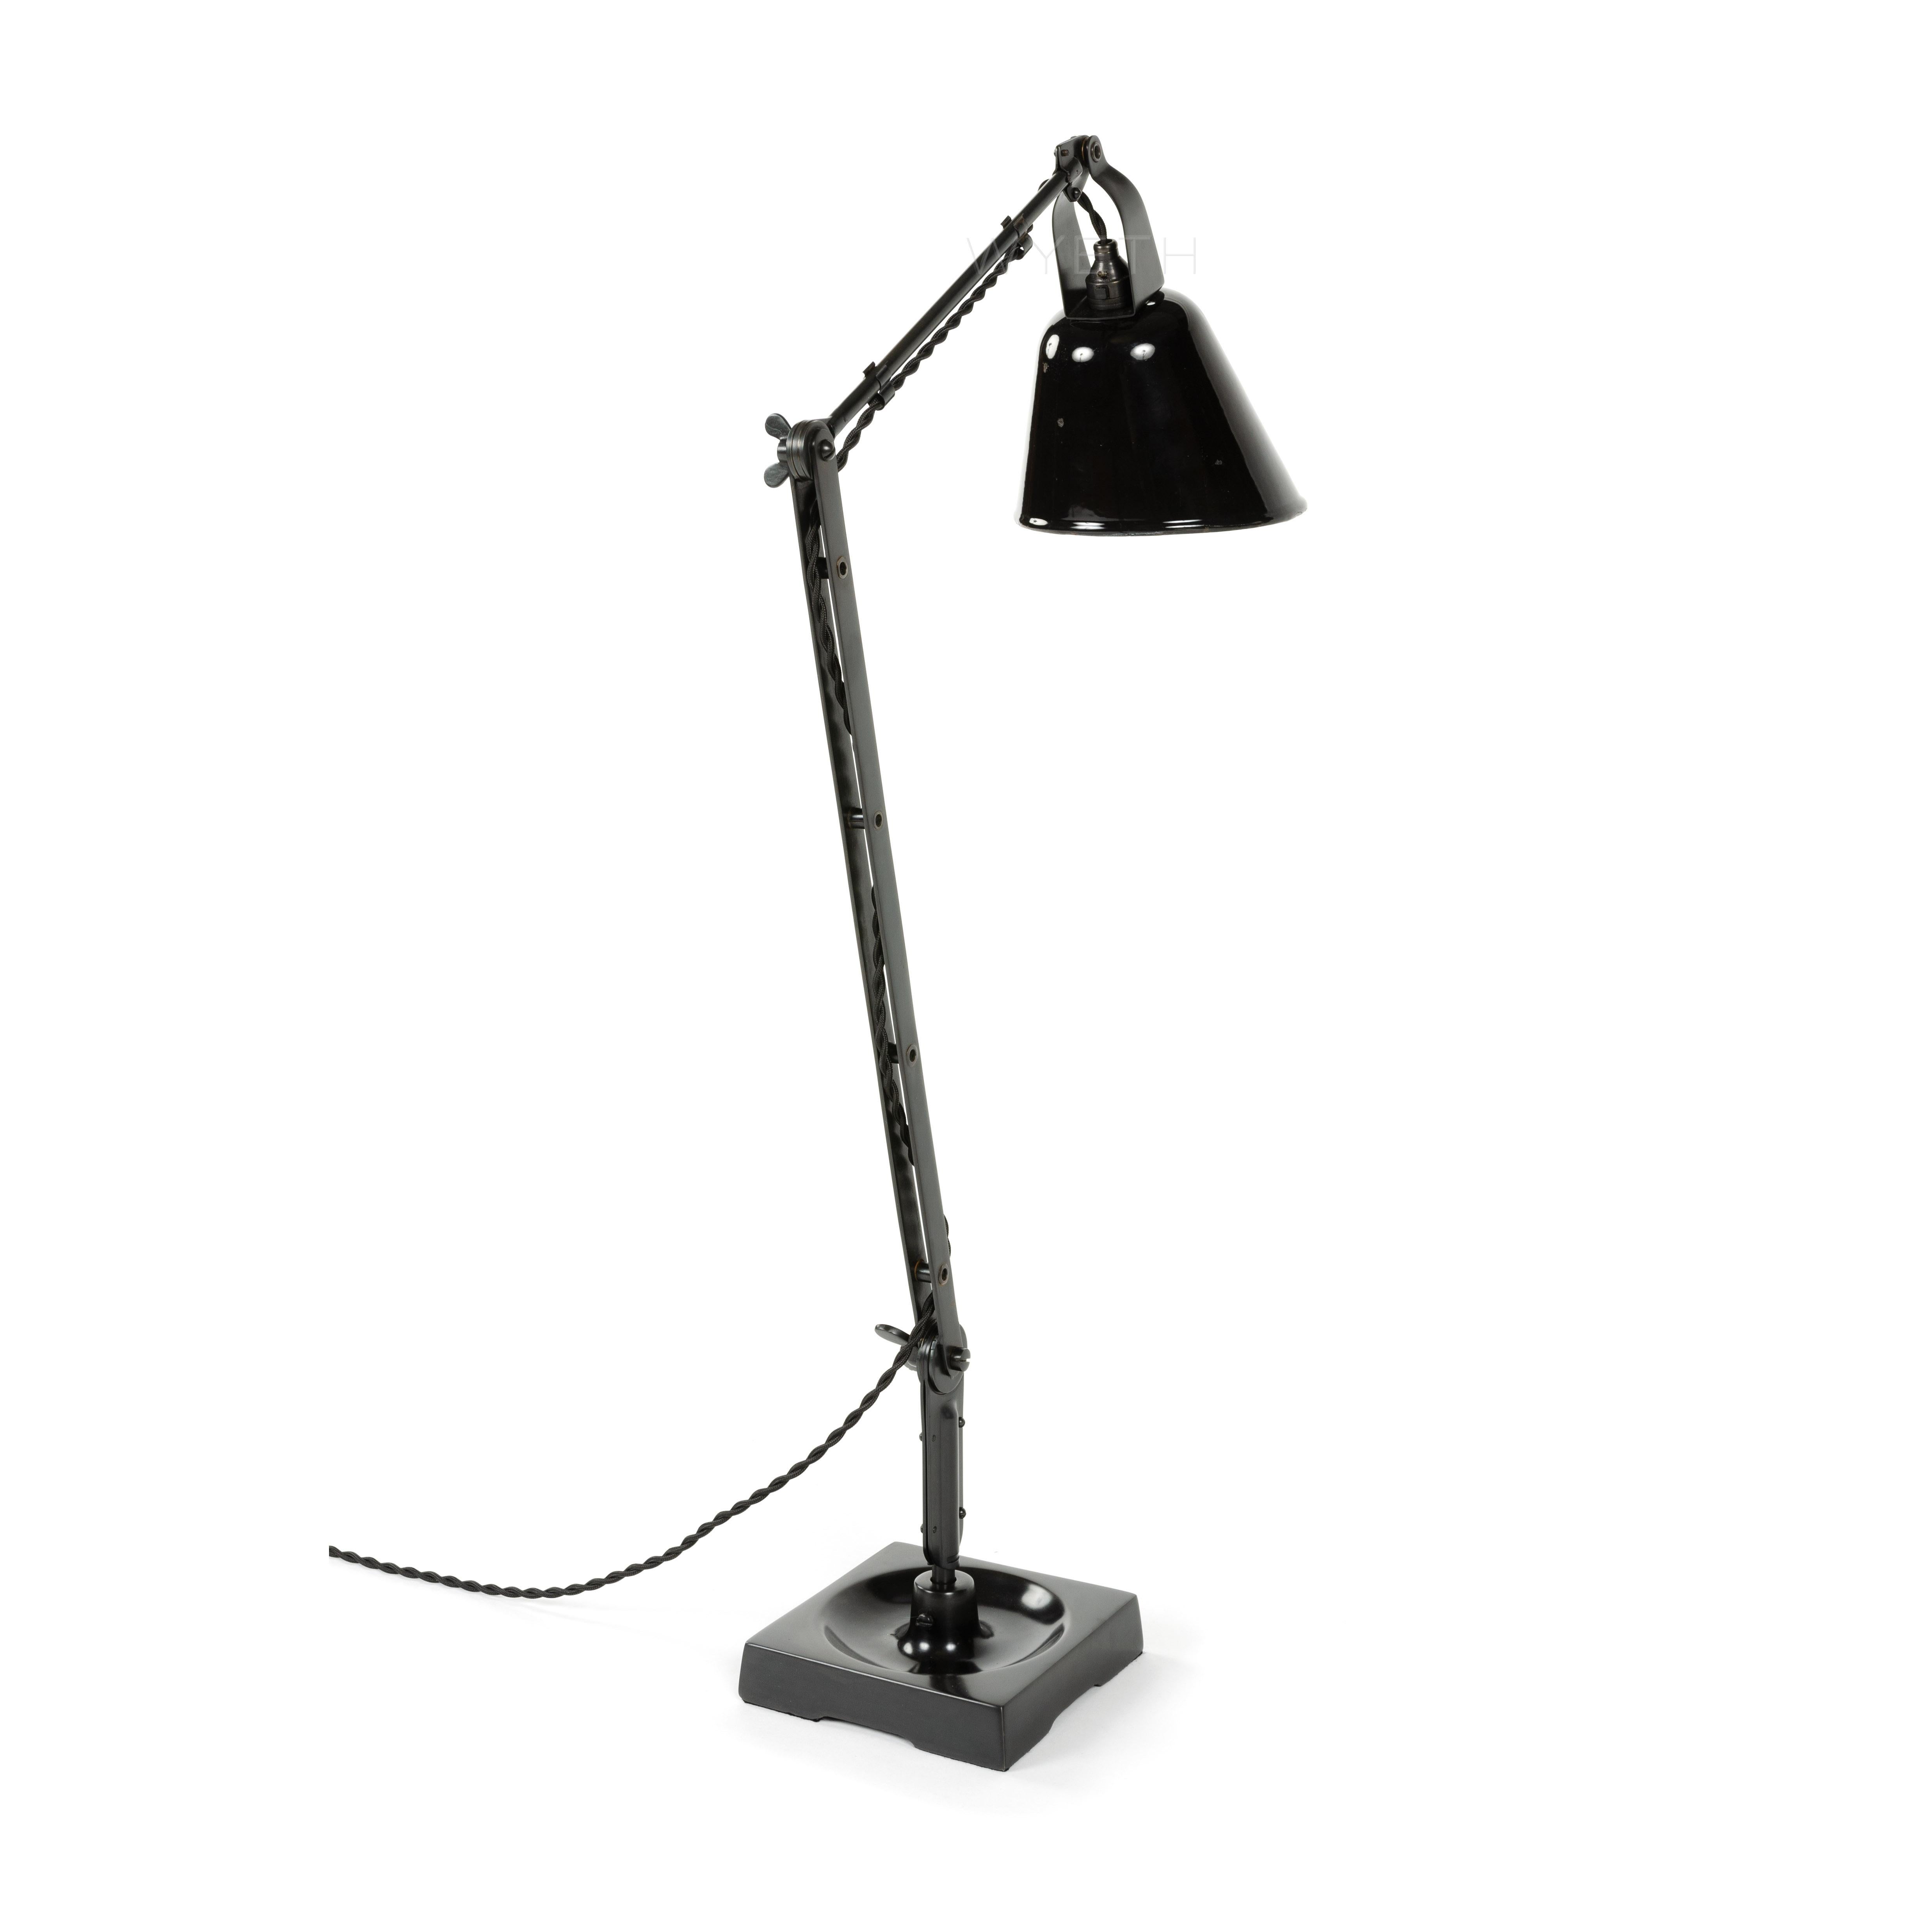 An articulated Zonalite desk lamp with a pivoting black and white enameled shade and a square moat base.